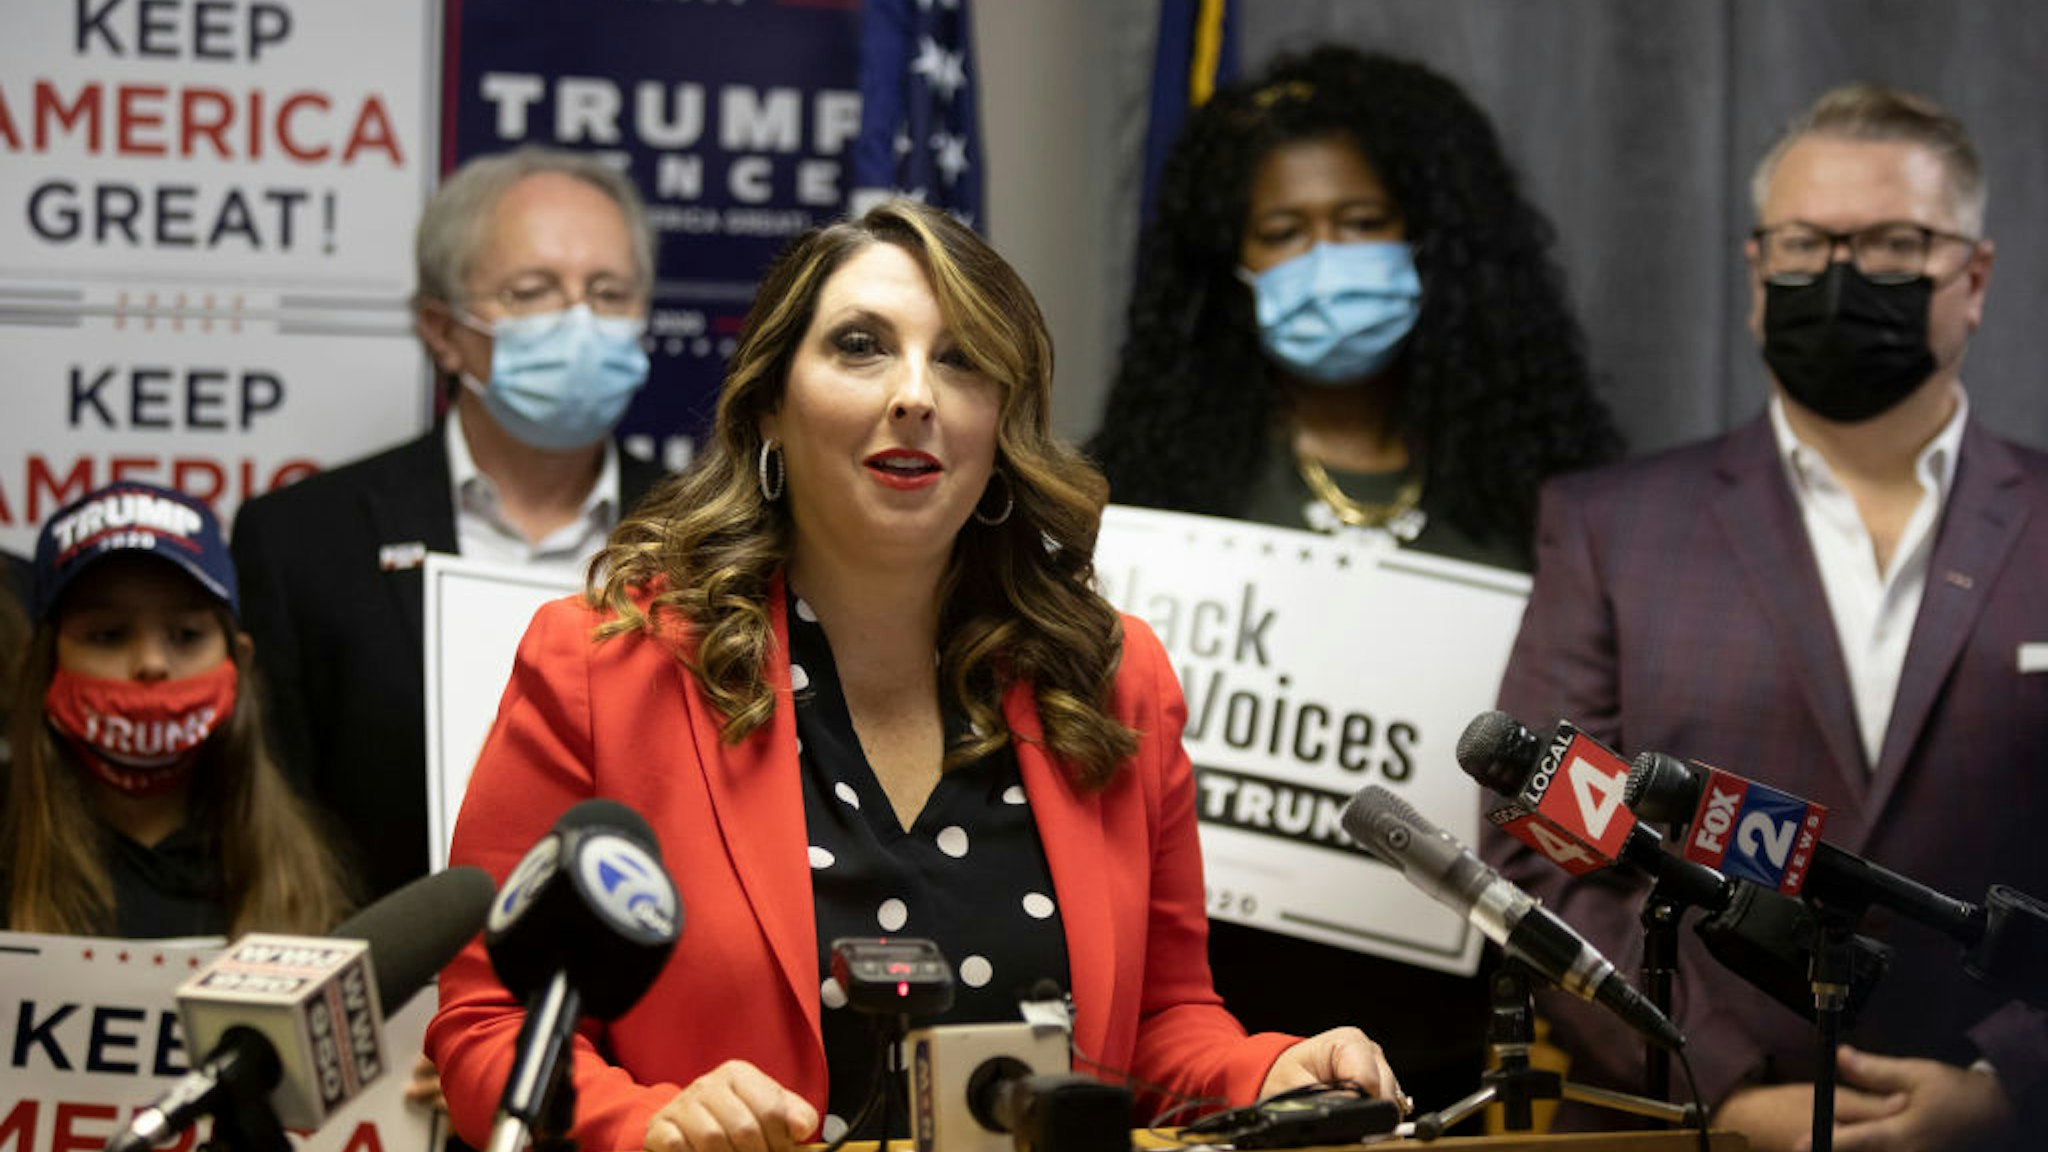 Republican National Committee Chairwoman Ronna McDaniel speaks during the Trump Victory press conference on November 6, 2020 in Bloomfield Hills, Michigan.